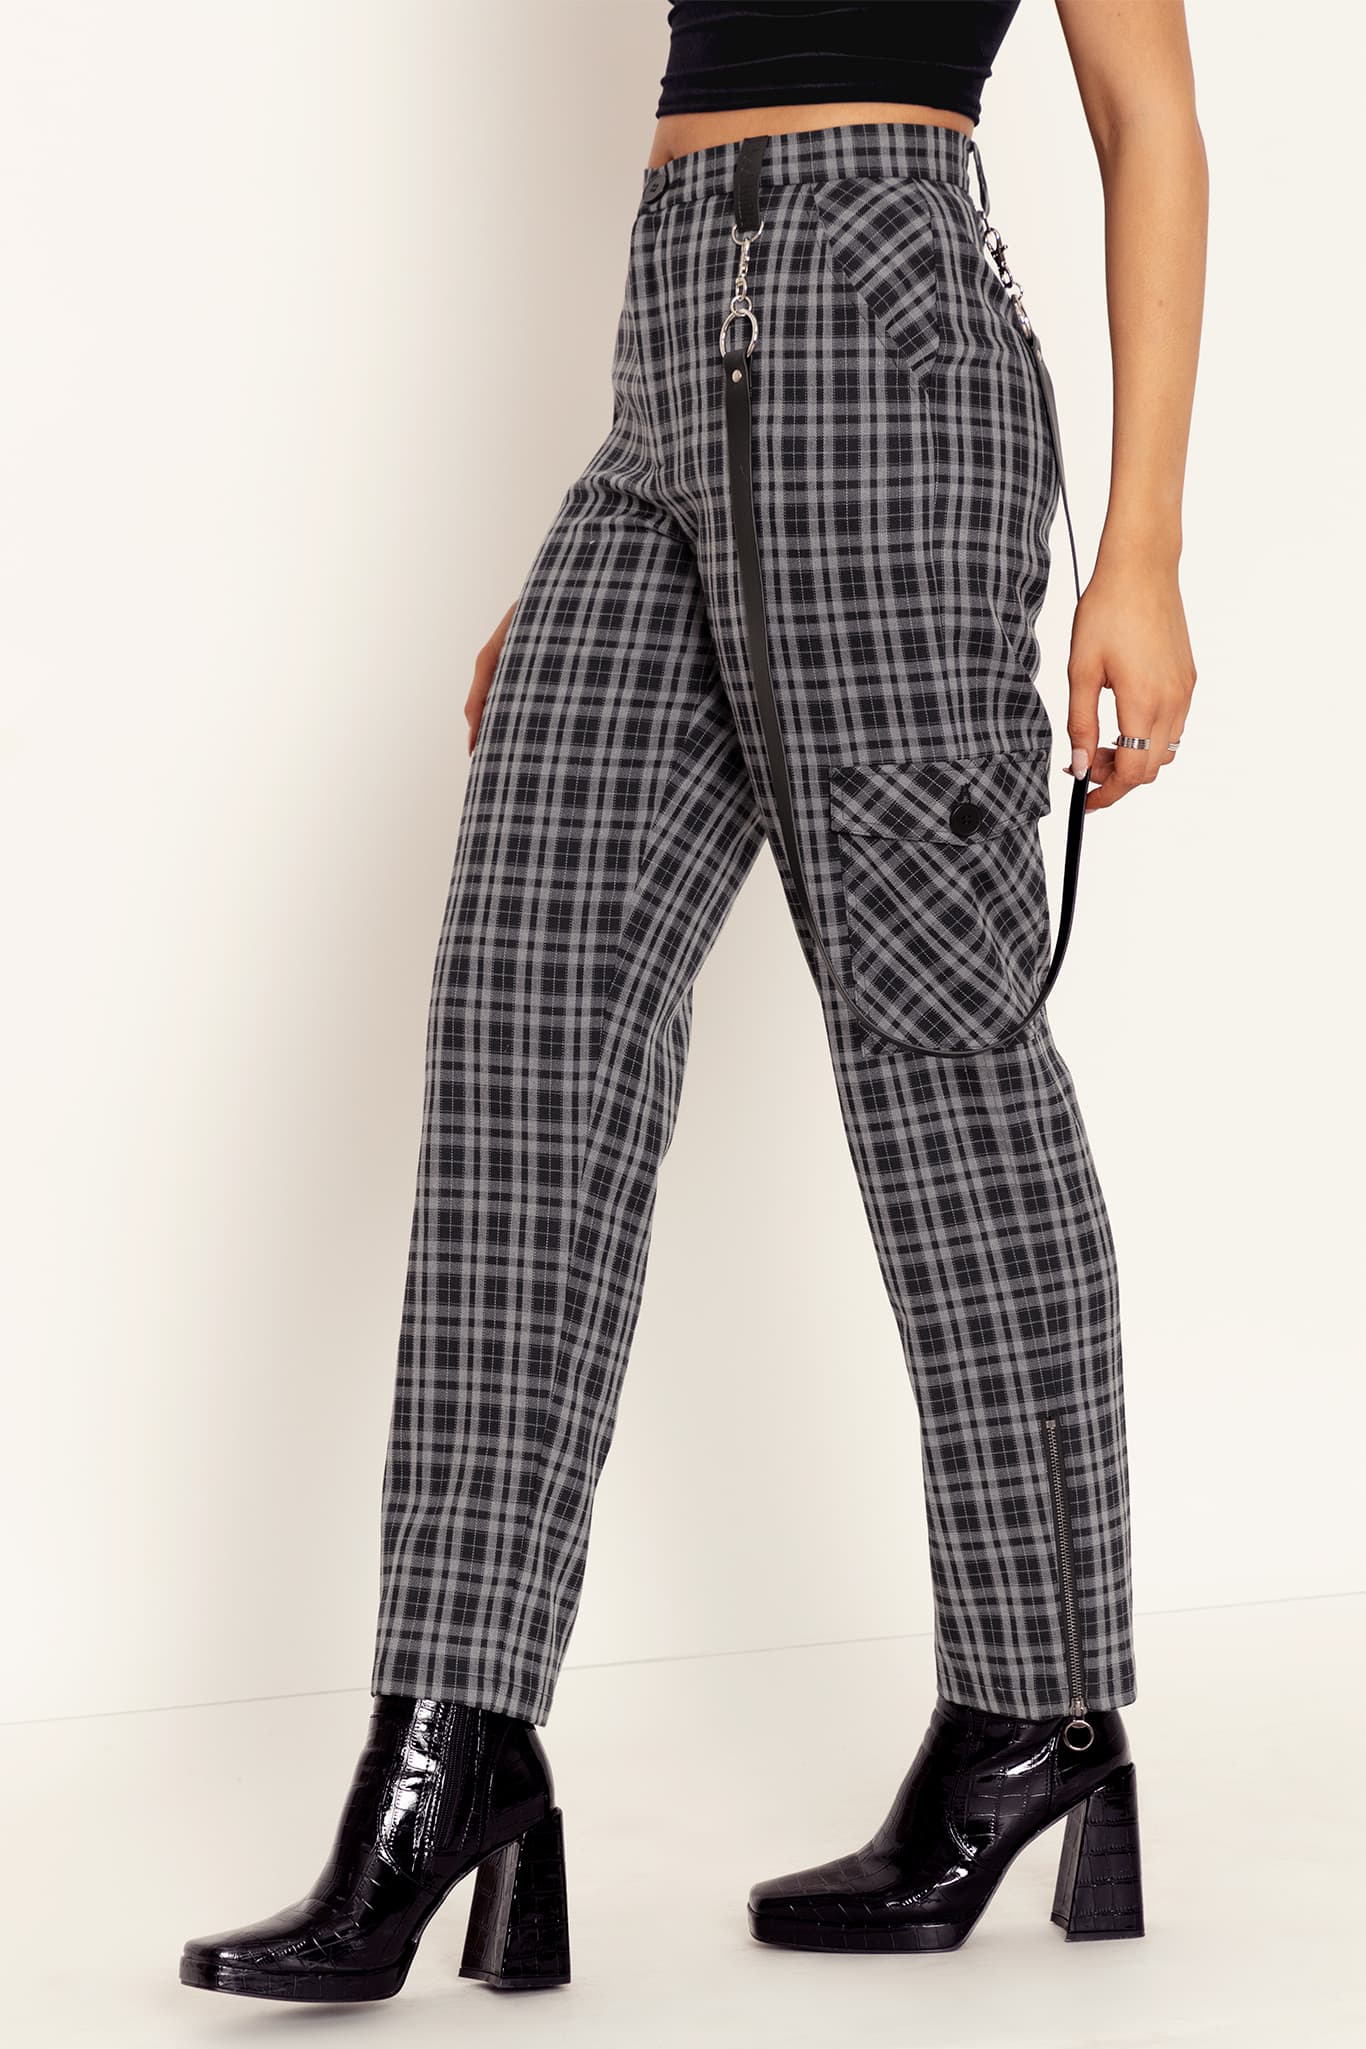 Willow & Root Checkered Pant - Women's Pants in Green | Buckle